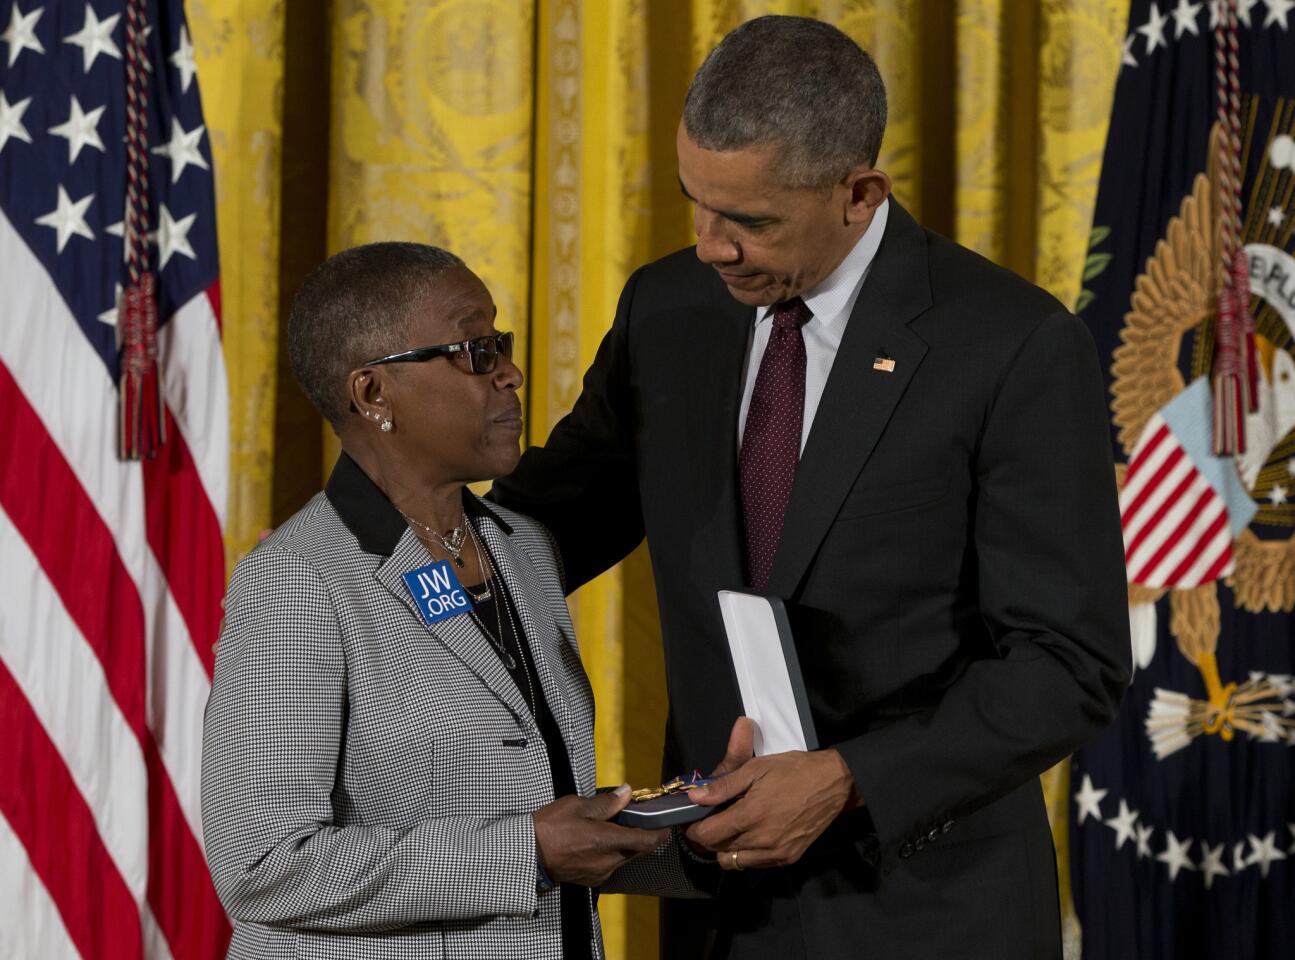 President Barack Obama presents Constance Wilson, grandmother of fallen Philadelphia Police Department Sgt, Robert Wilson III with his Medal of Valor during a ceremony in the East Room of the White House in Washington, Monday, May 16, 2016.